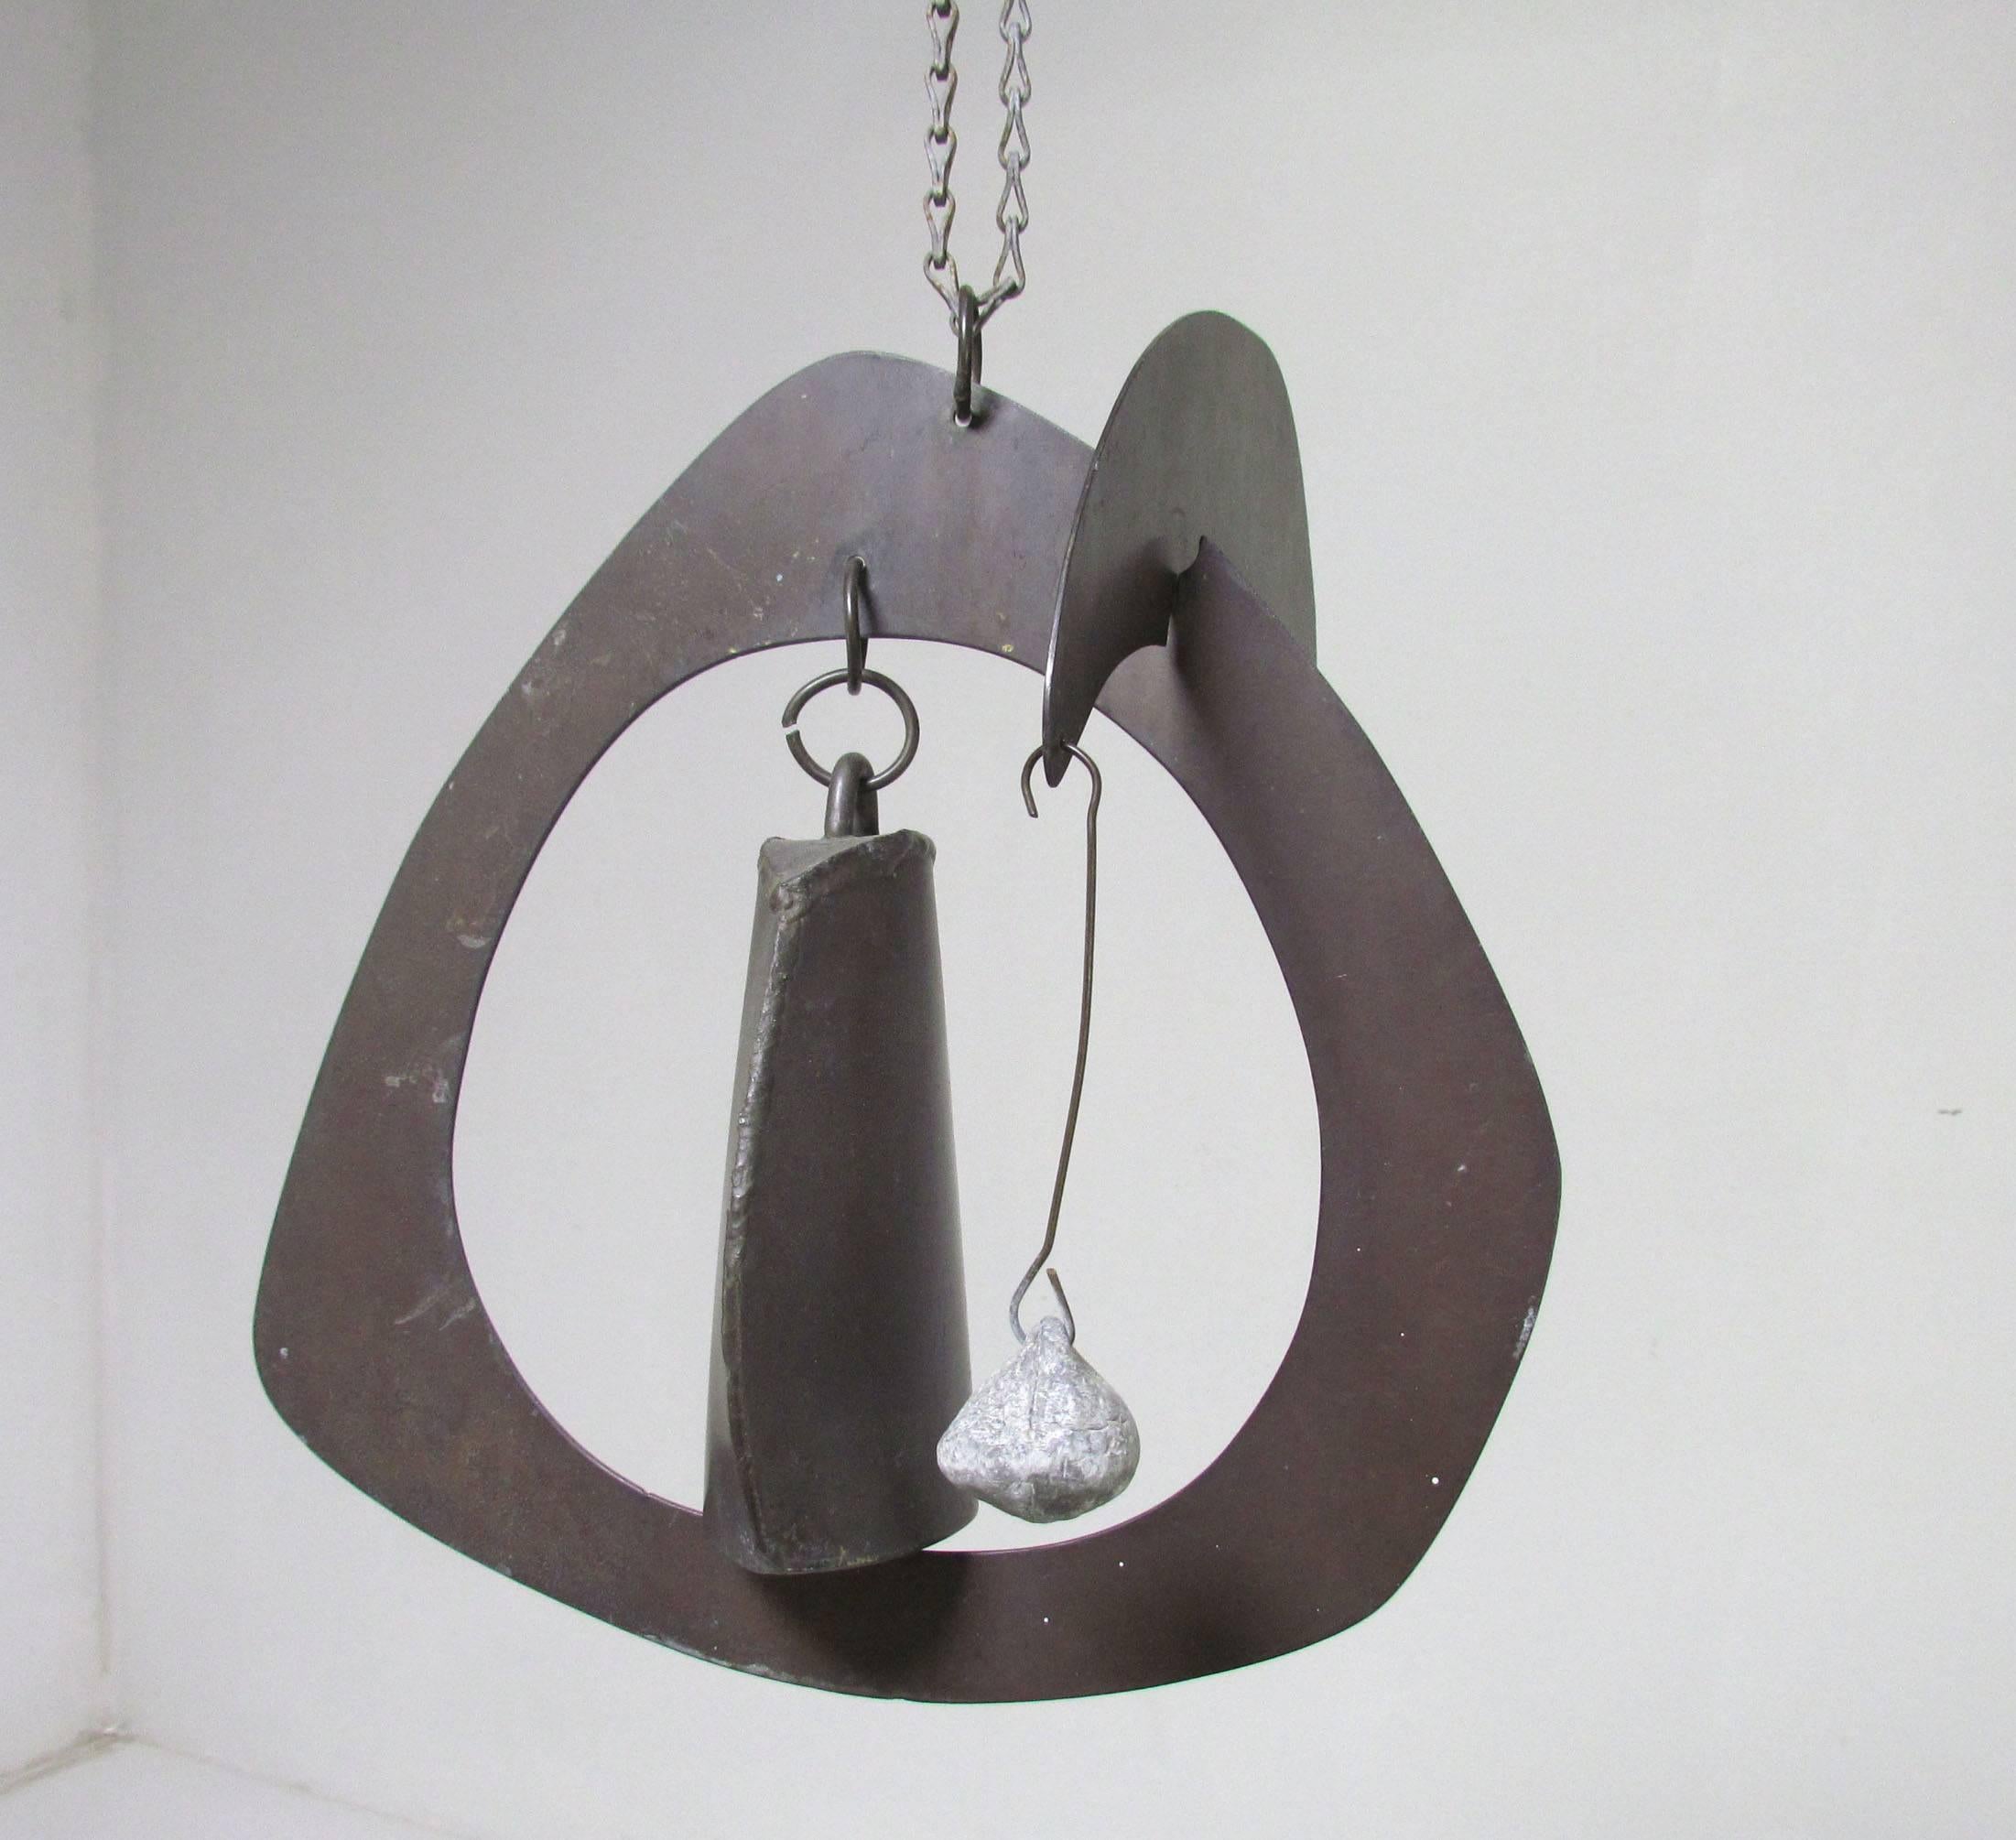 Handmade sculptural kinetic wind chime/ bell in folded and welded steel, counterbalanced with a crescent shaped arm and lead weight “clapper” to sound a low cow bell tone when the wind strikes just right. Signed with a mysteriously intriguing